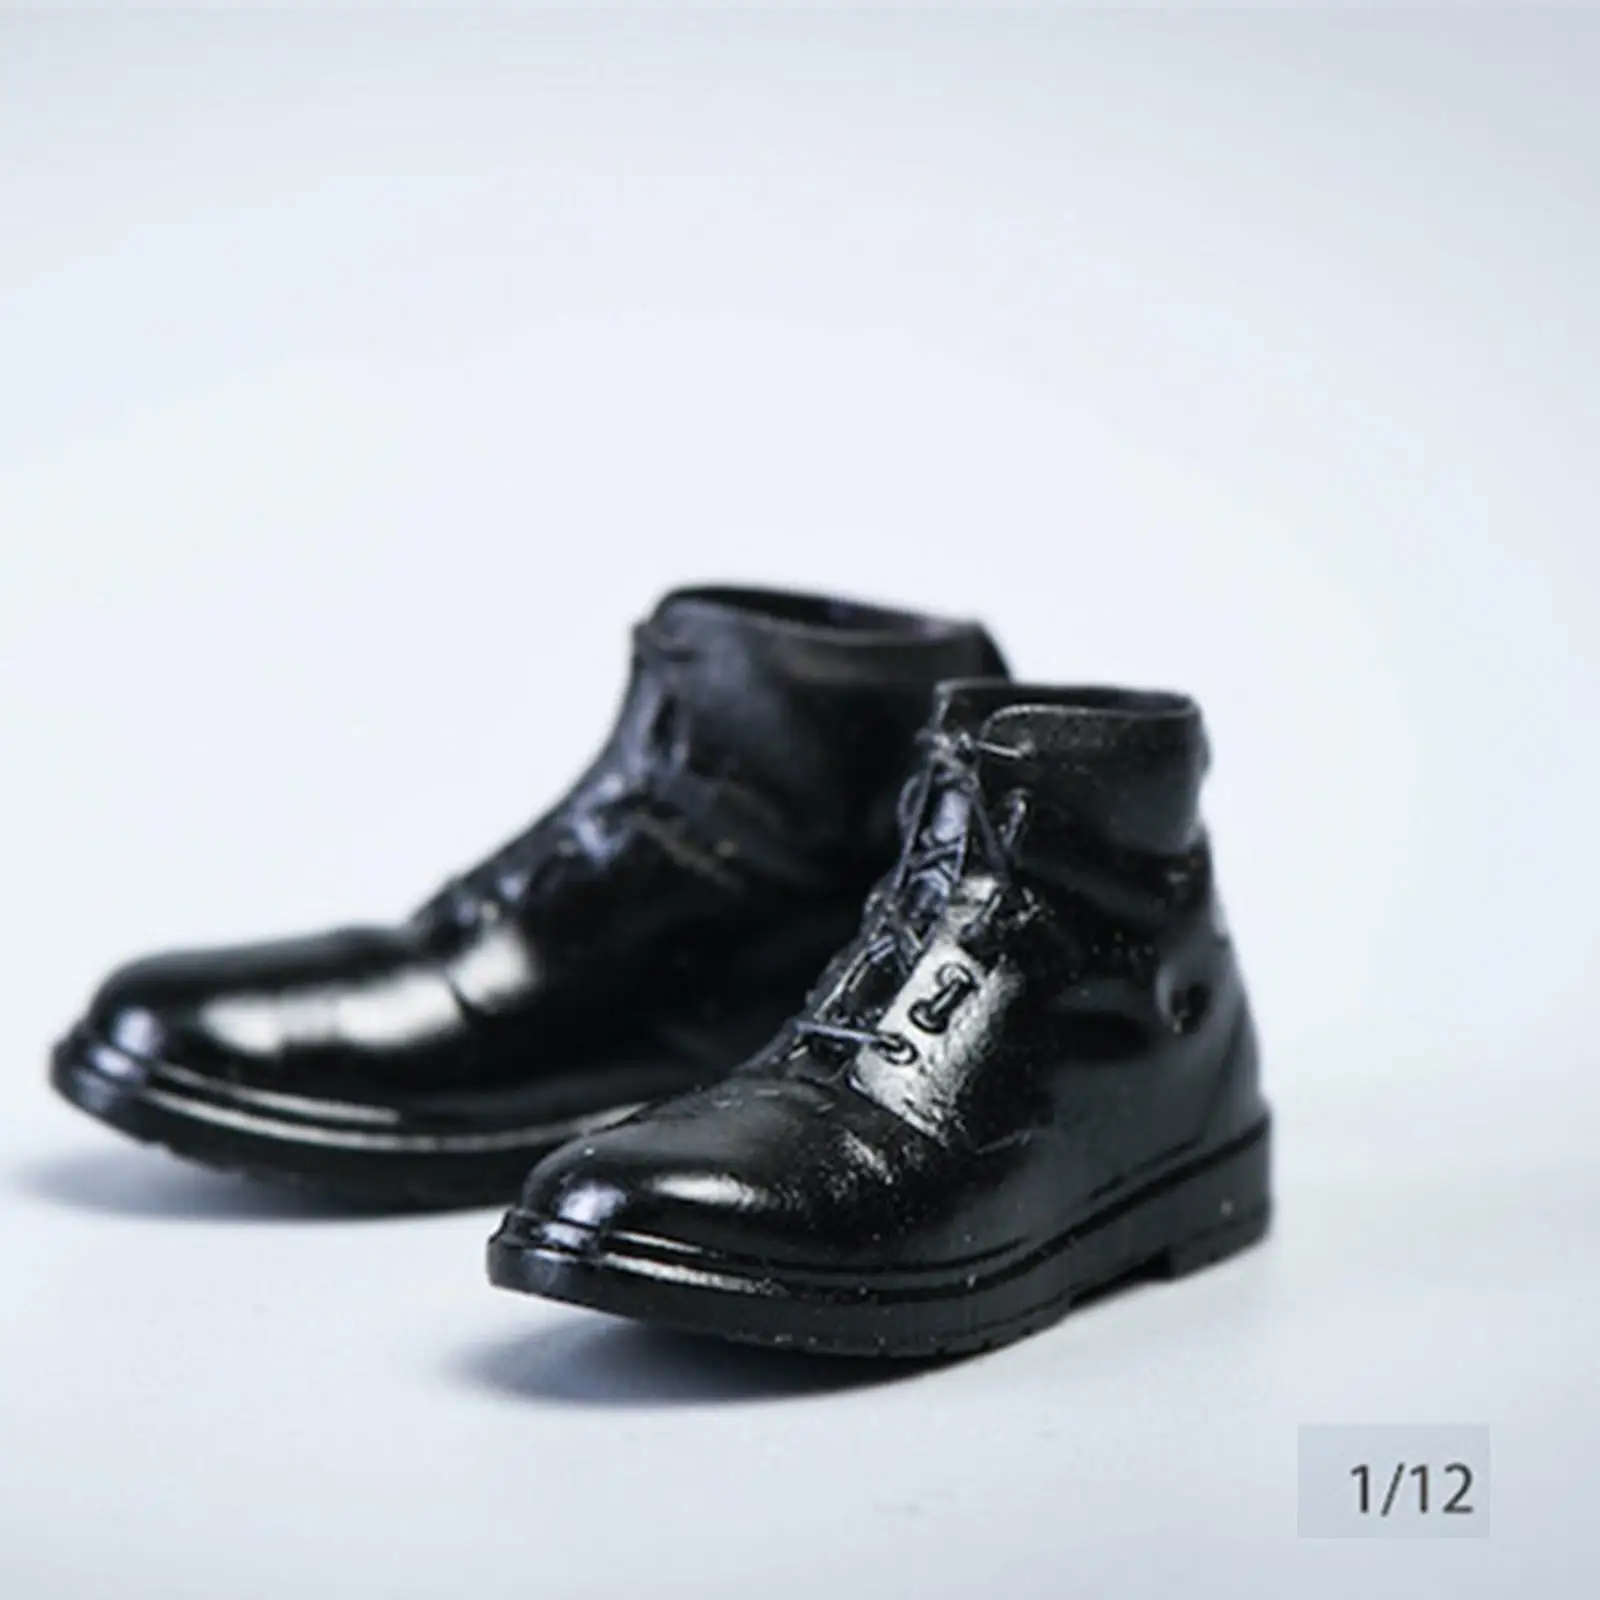 1 Set 1:12 Male Leather Shoes for Doll Toys Figures Stylish  Toy Gifts for Girl